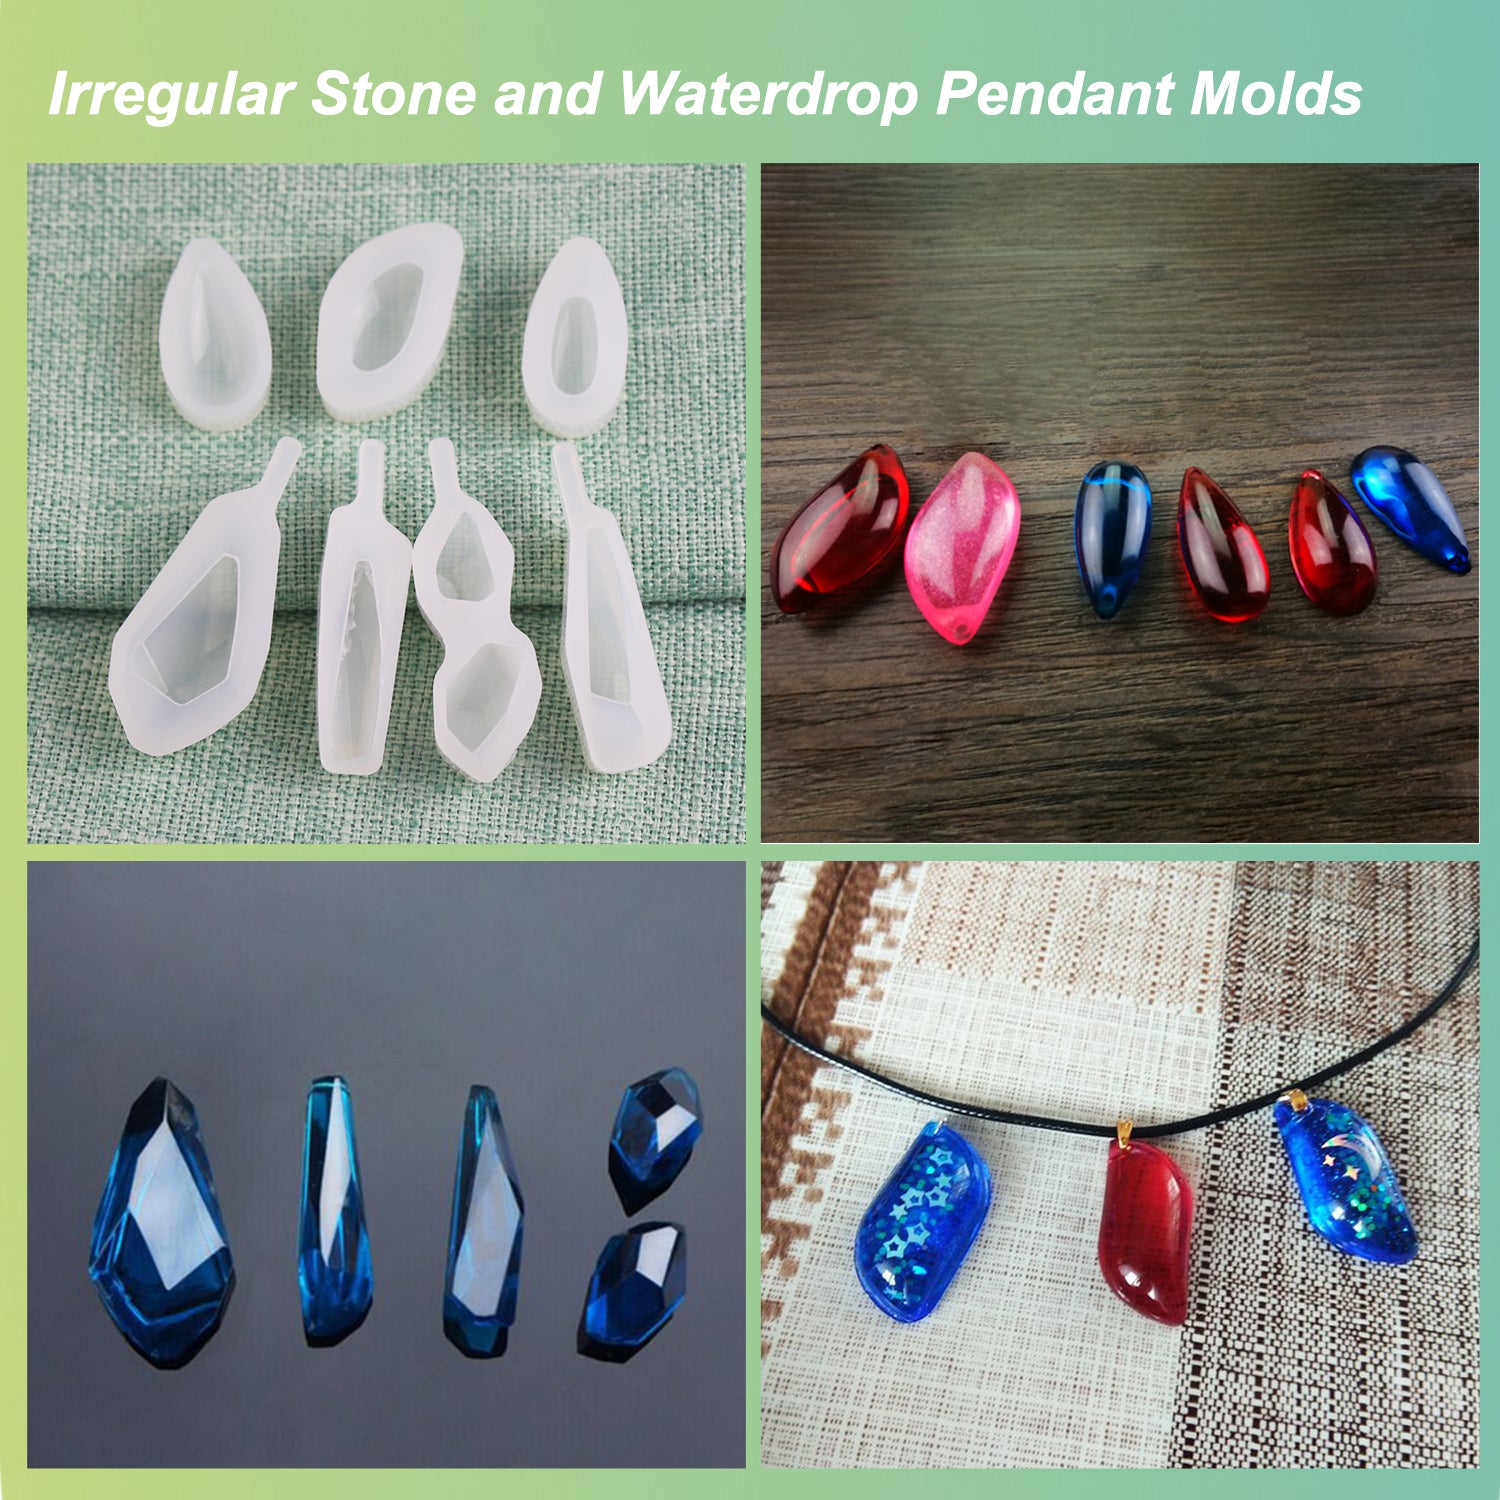 LET'S RESIN 30pcs Resin Jewelry Molds, Jewelry Molds for UV Resin, Resin  Silicone Molds kit with Bracelet Molds,Pendant Molds,Ri